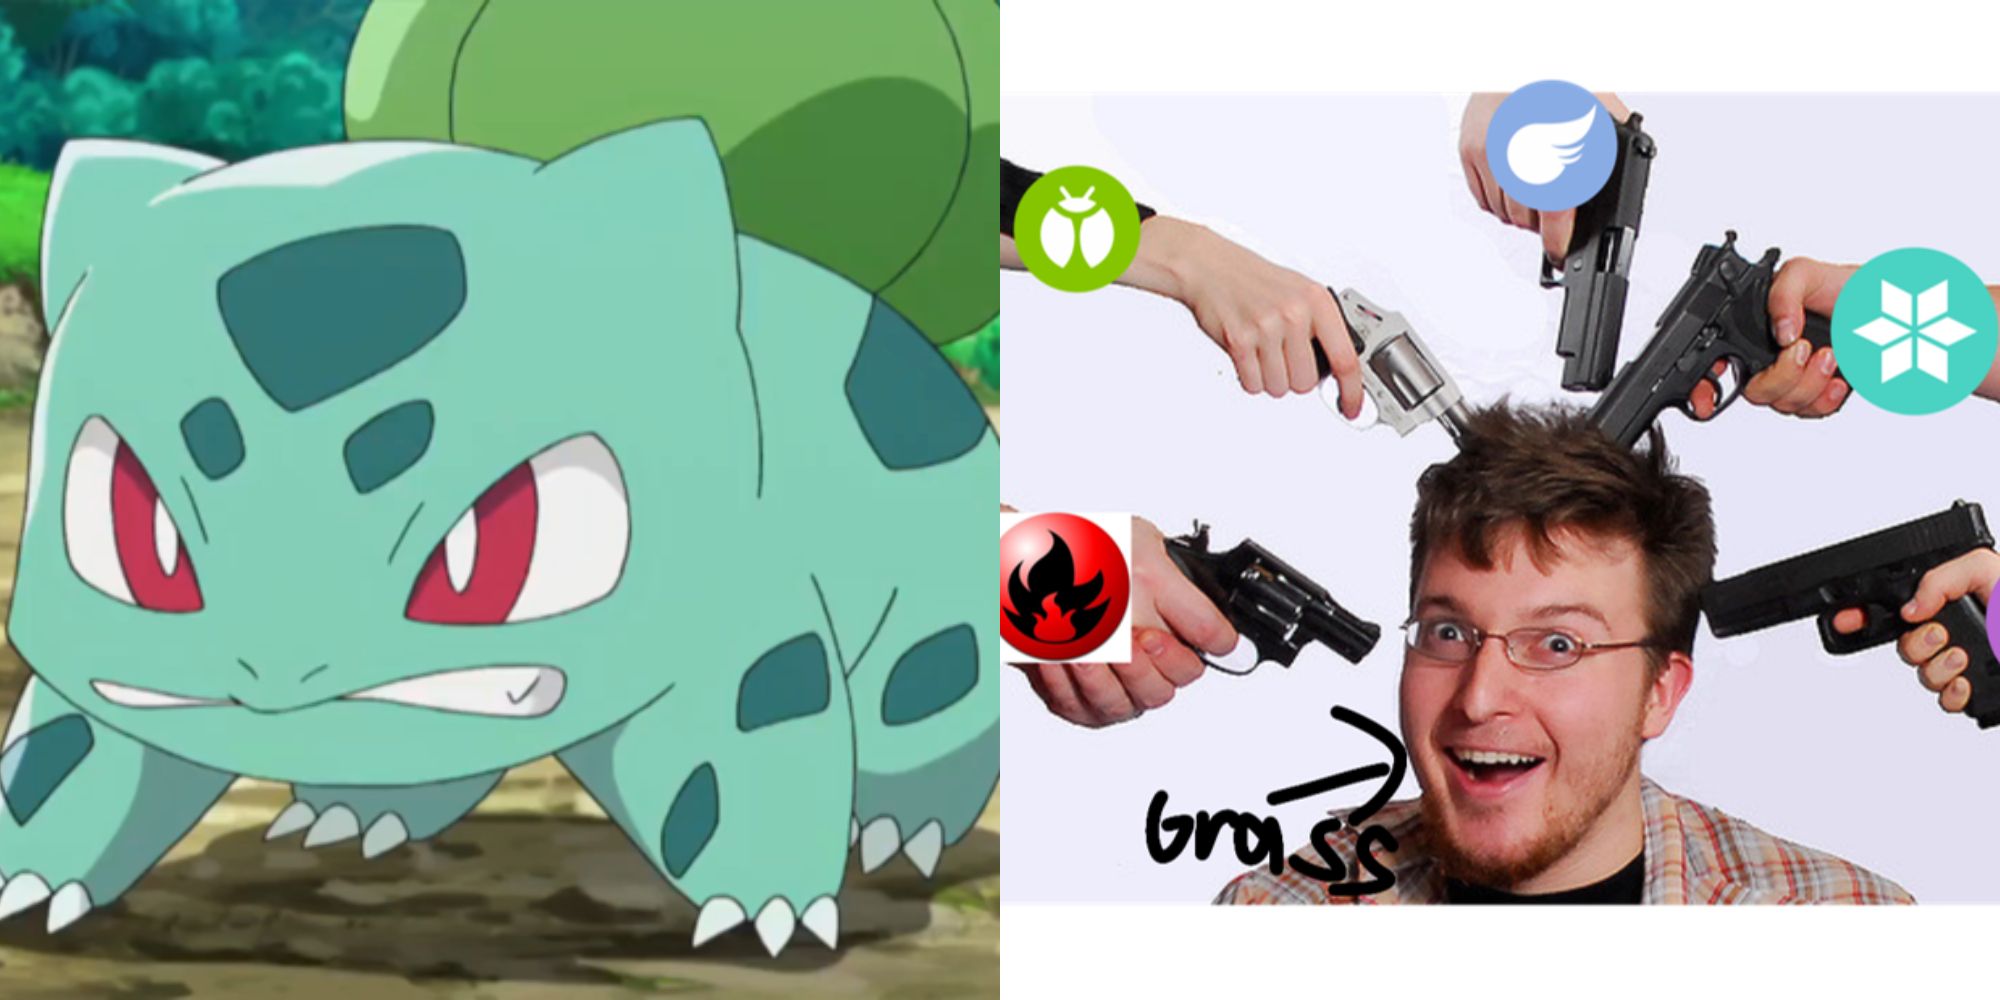 Split image showing Bulbasaur in the Pokémon anime and a meme about Grass-types